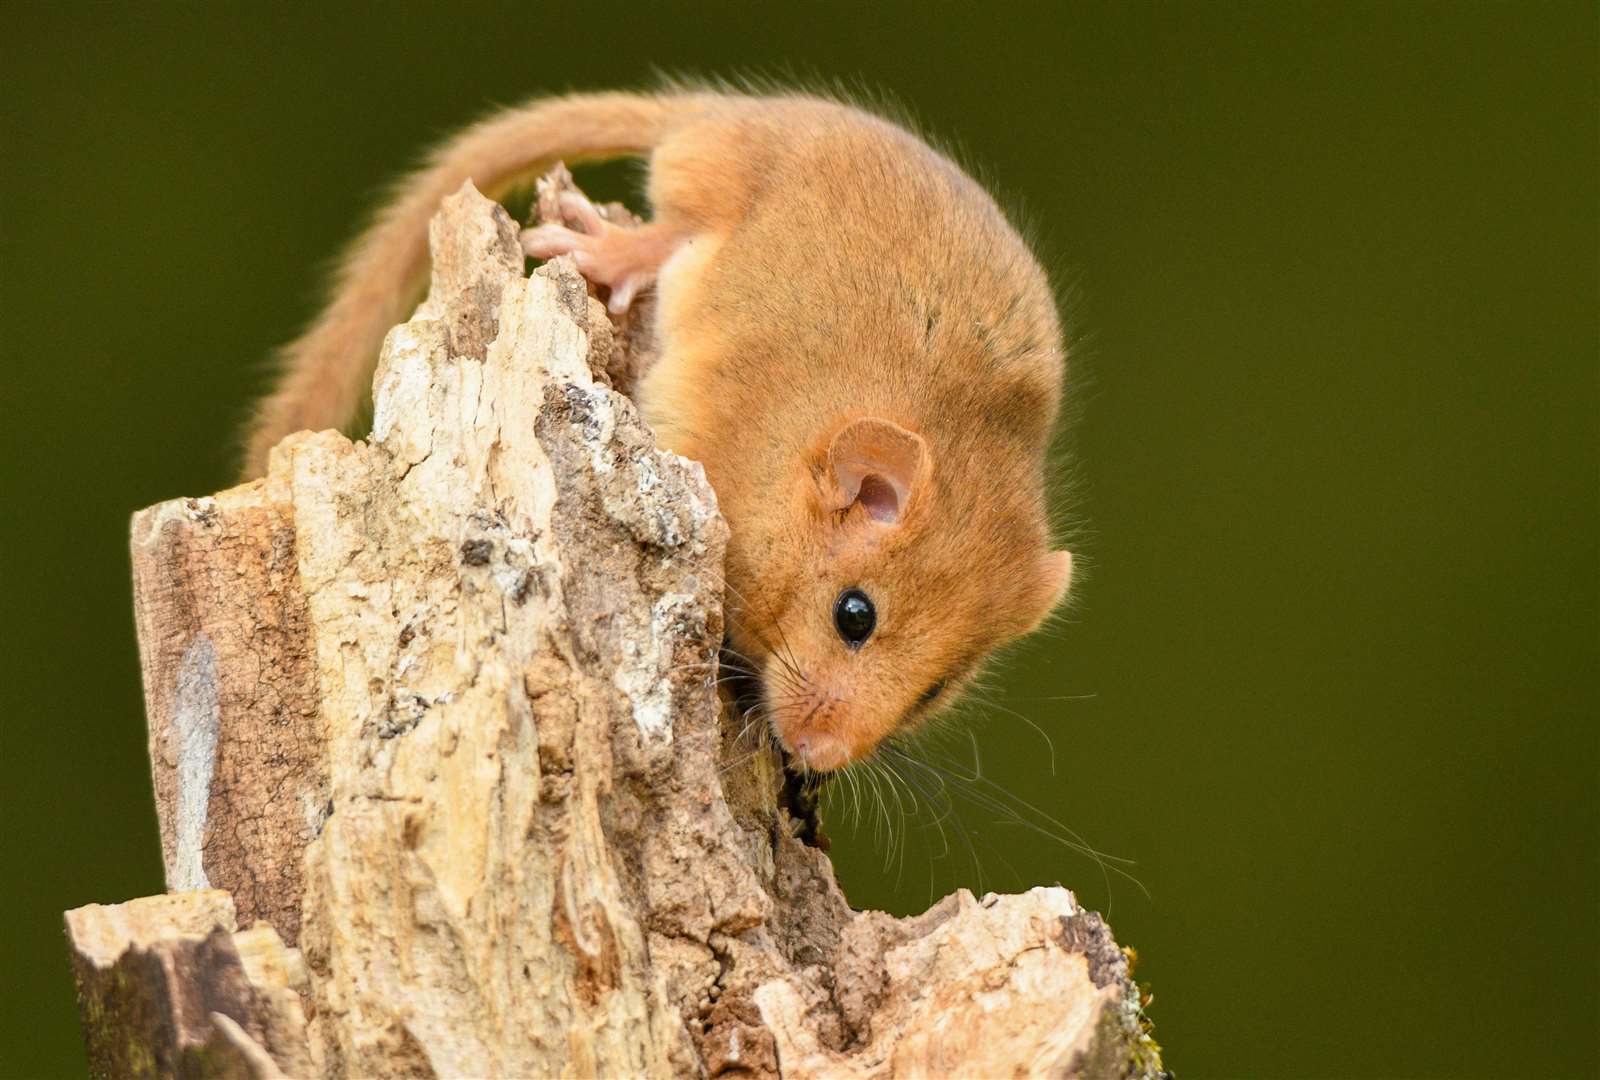 The hazel doormouse is struggling amid habitat decline and climate change. Image: iStock.